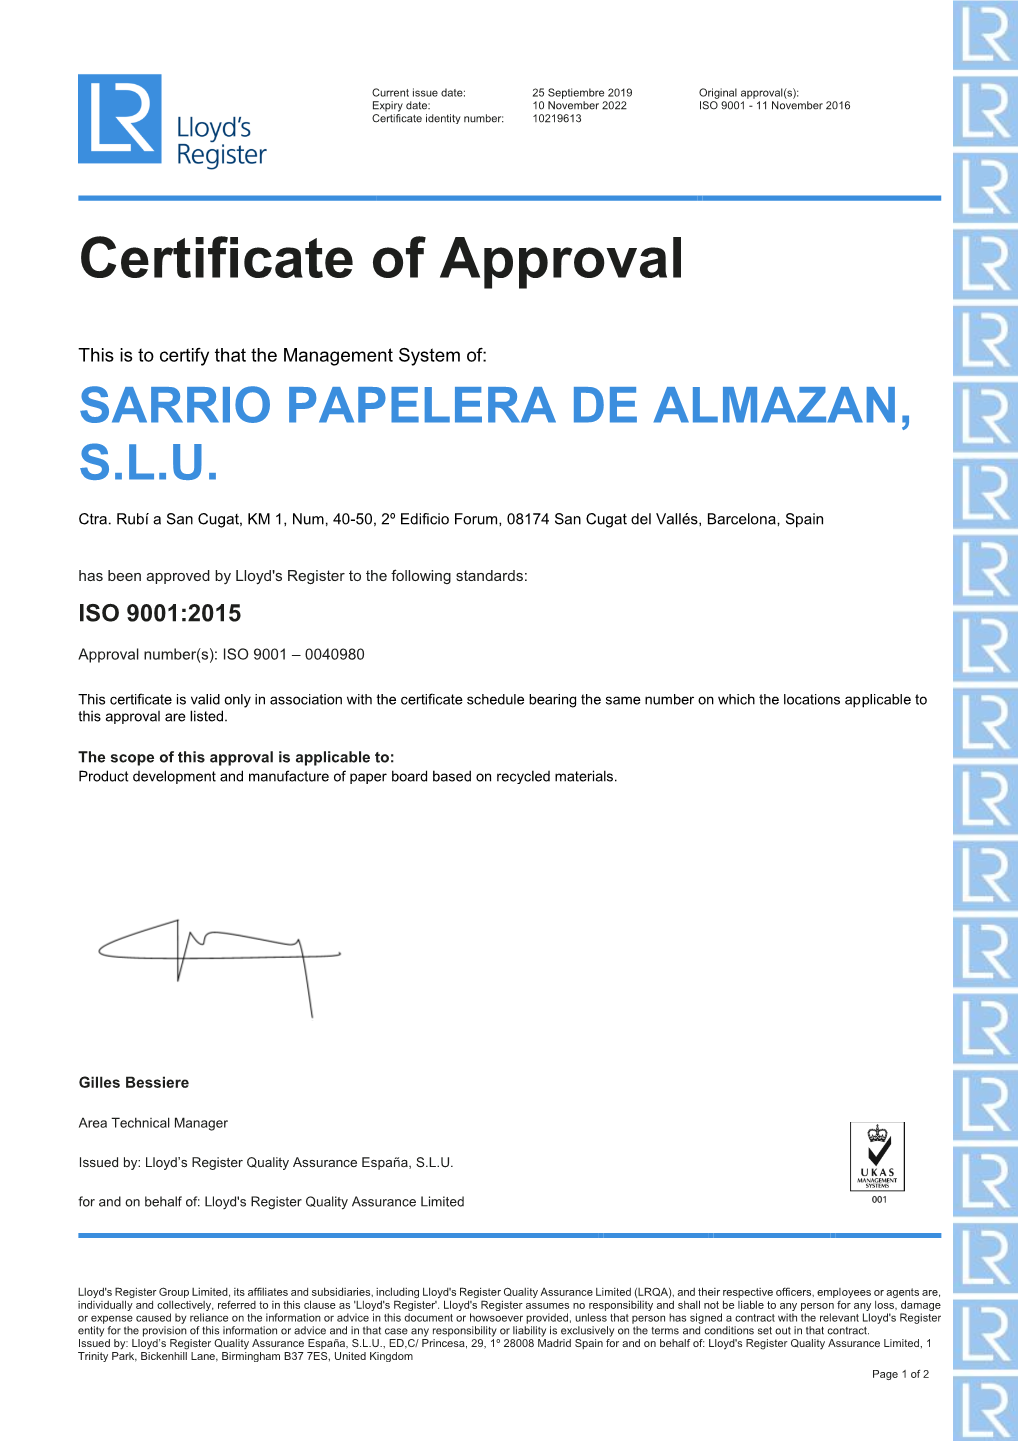 This Is to Certify That the Management System Of: SARRIO PAPELERA DE ALMAZAN